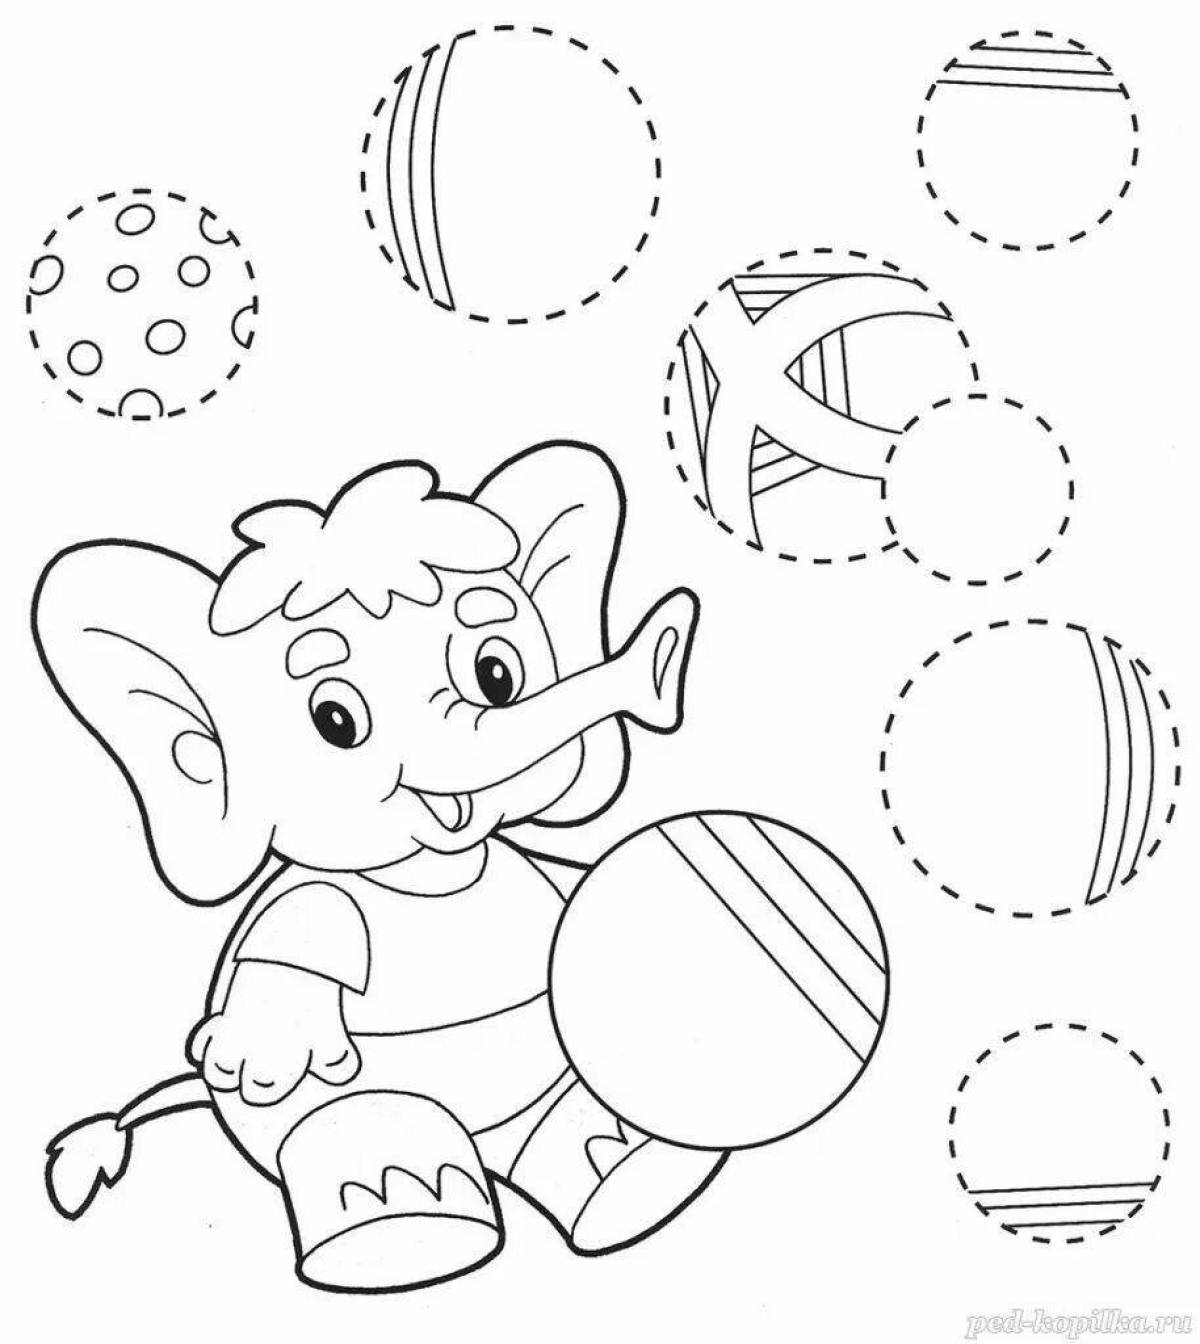 Difficult coloring tasks for 3-4 year olds